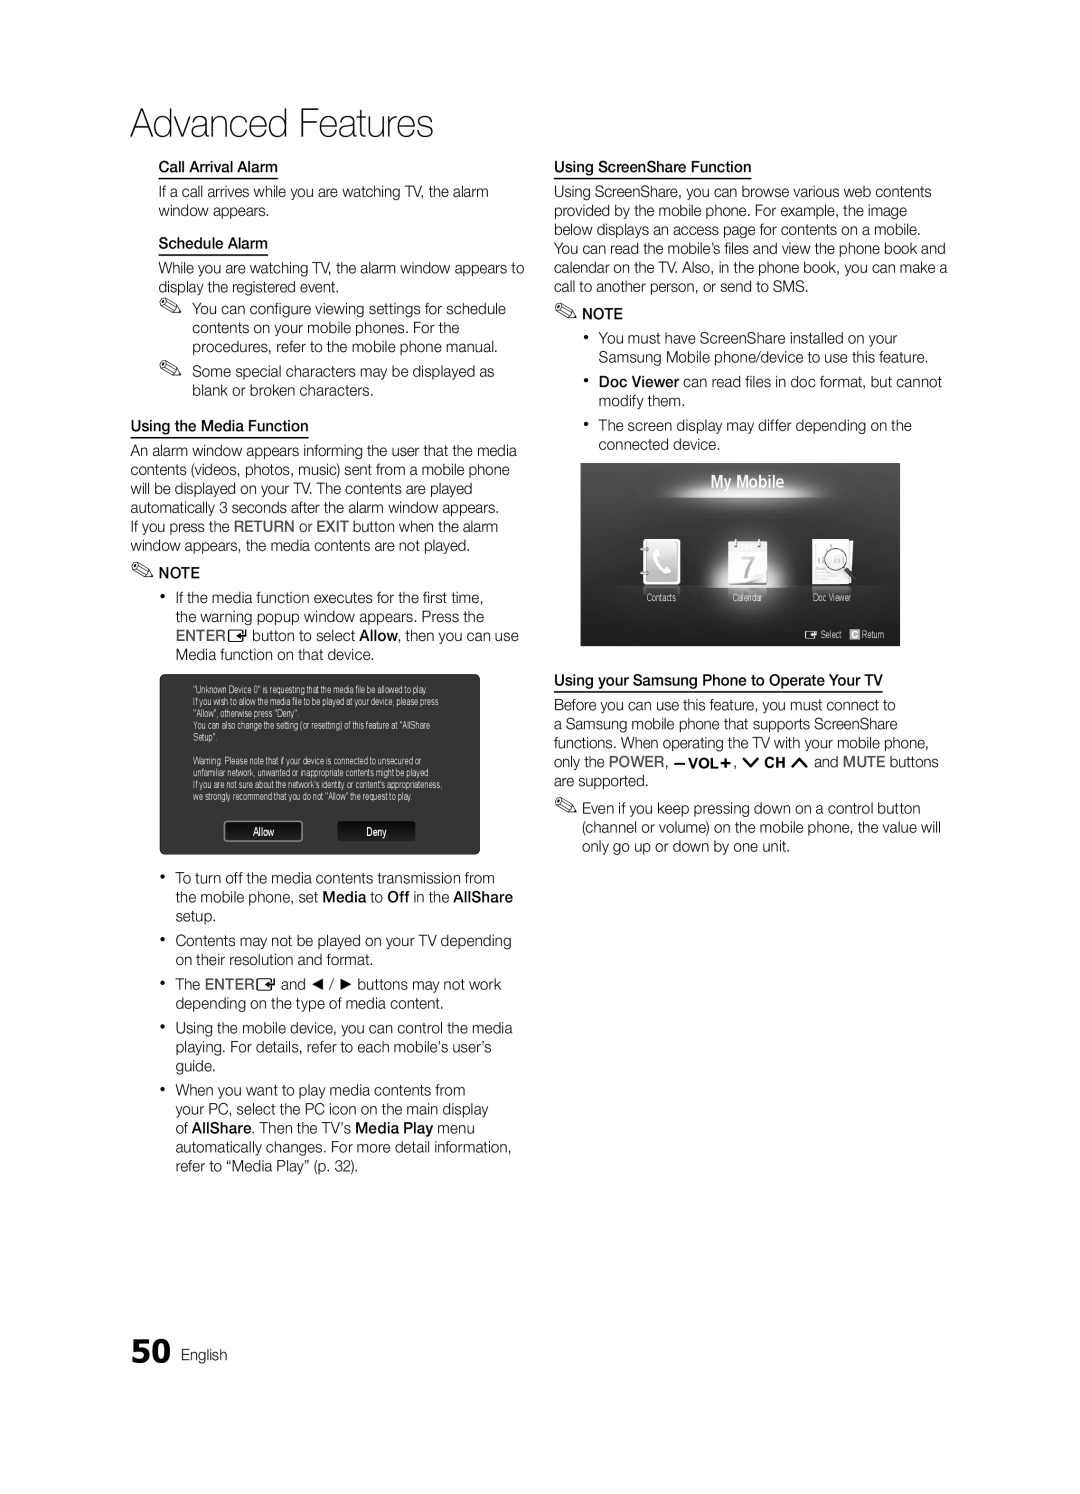 Samsung 6800 user manual My Mobile, Advanced Features 